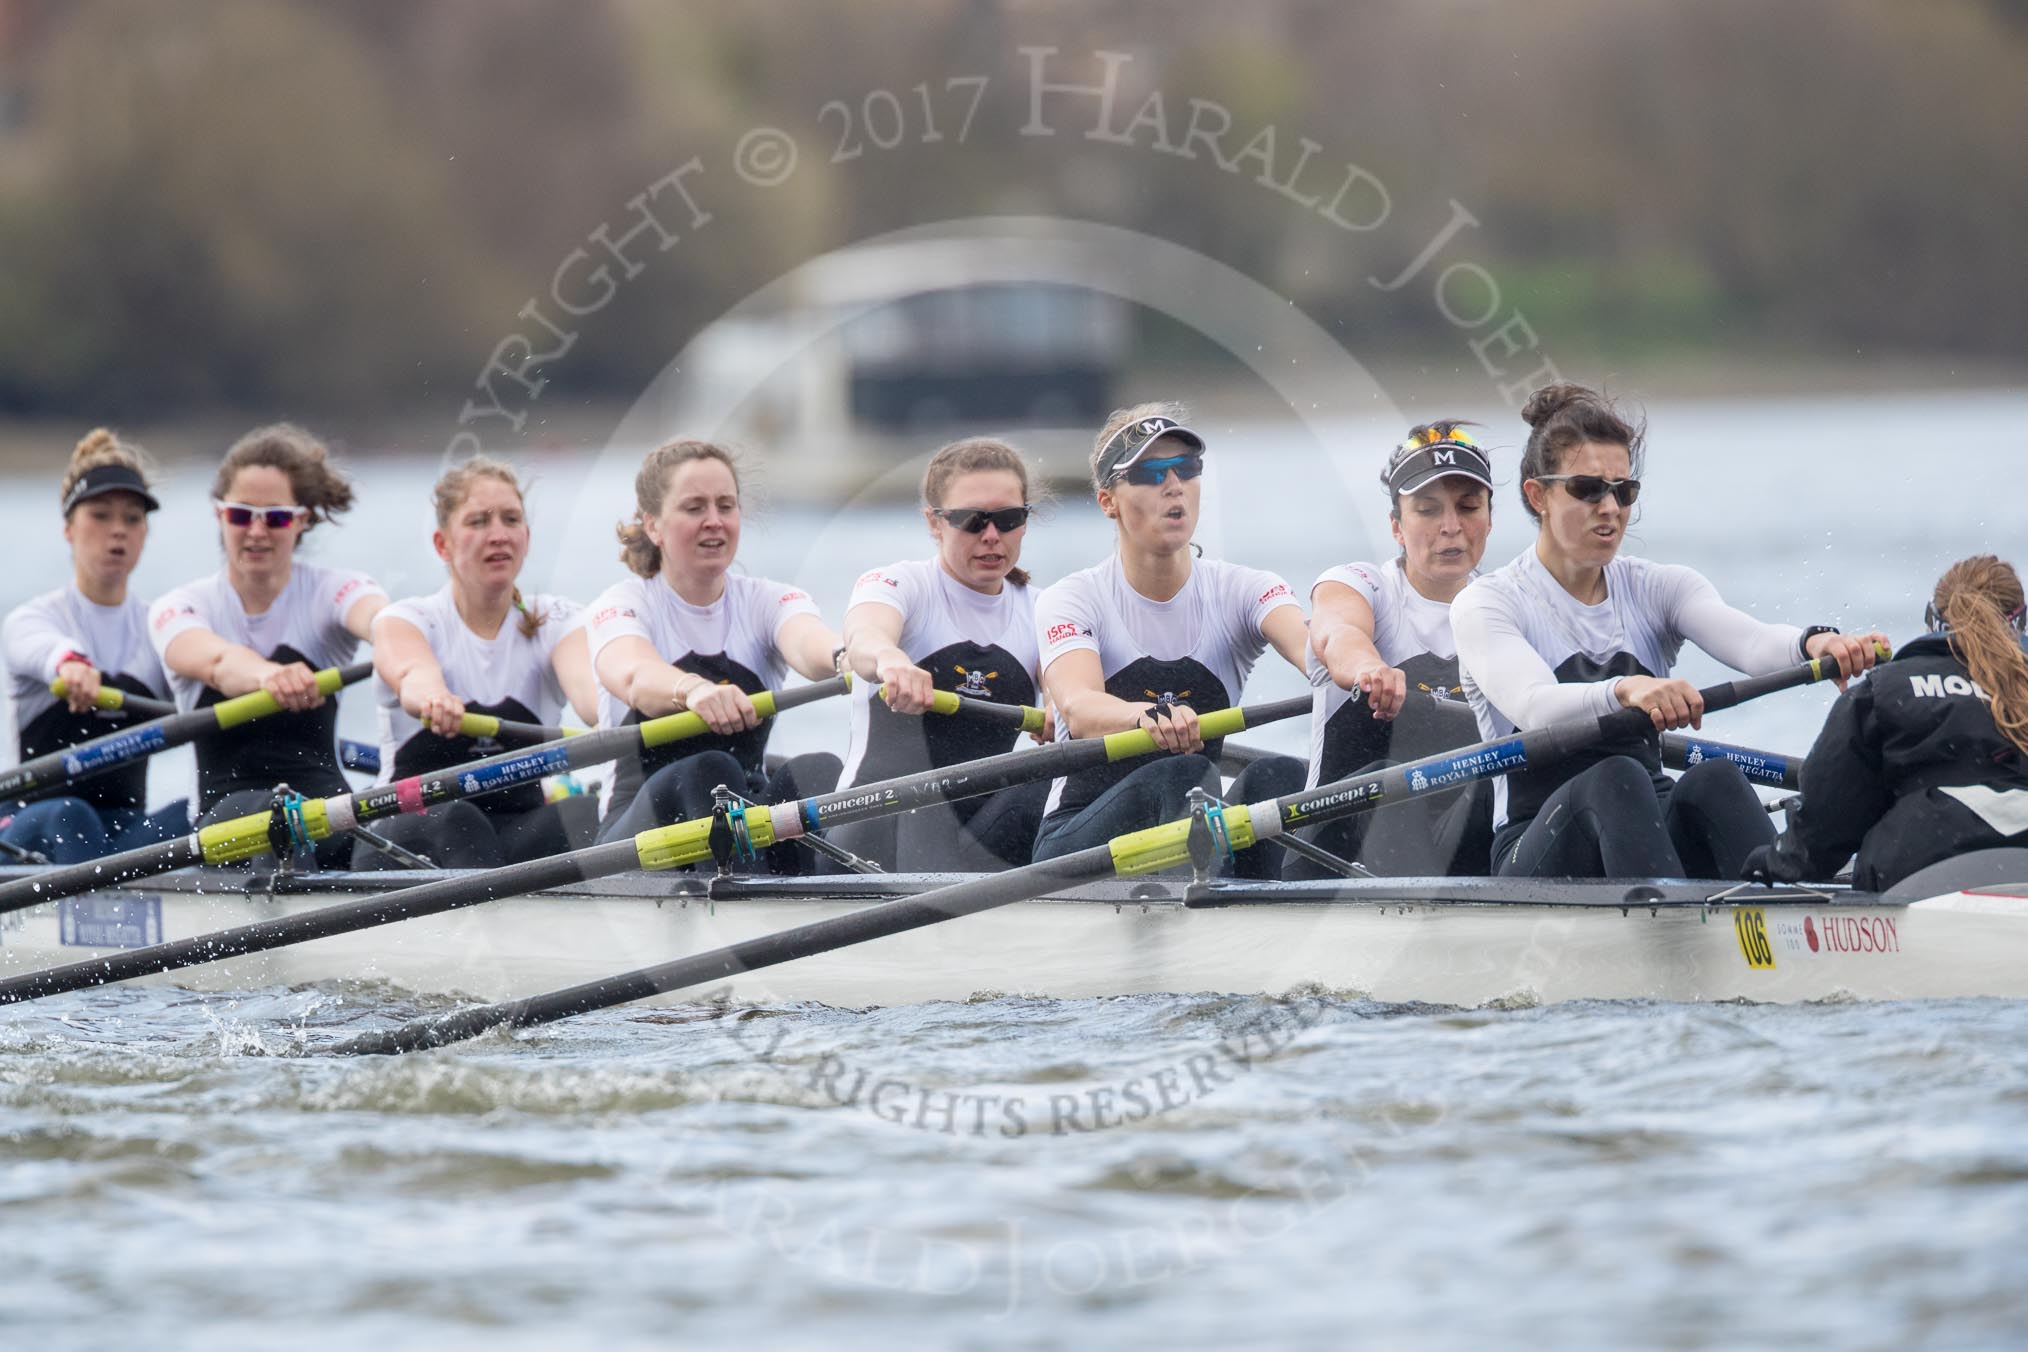 The Cancer Research UK Boat Race season 2017 - Women's Boat Race Fixture OUWBC vs Molesey BC: Molesey in the early phase of the race - bow Emma McDonald, 2 Caitlin Boyland, 3 Lucy Primmer, 4 Claire McKeown, 5 Katie Bartlett, 6 Elo Luik, 7 Gabriella Rodriguez, stroke Ruth Whyman, cox Anna Corderoy.
River Thames between Putney Bridge and Mortlake,
London SW15,

United Kingdom,
on 19 March 2017 at 16:02, image #57